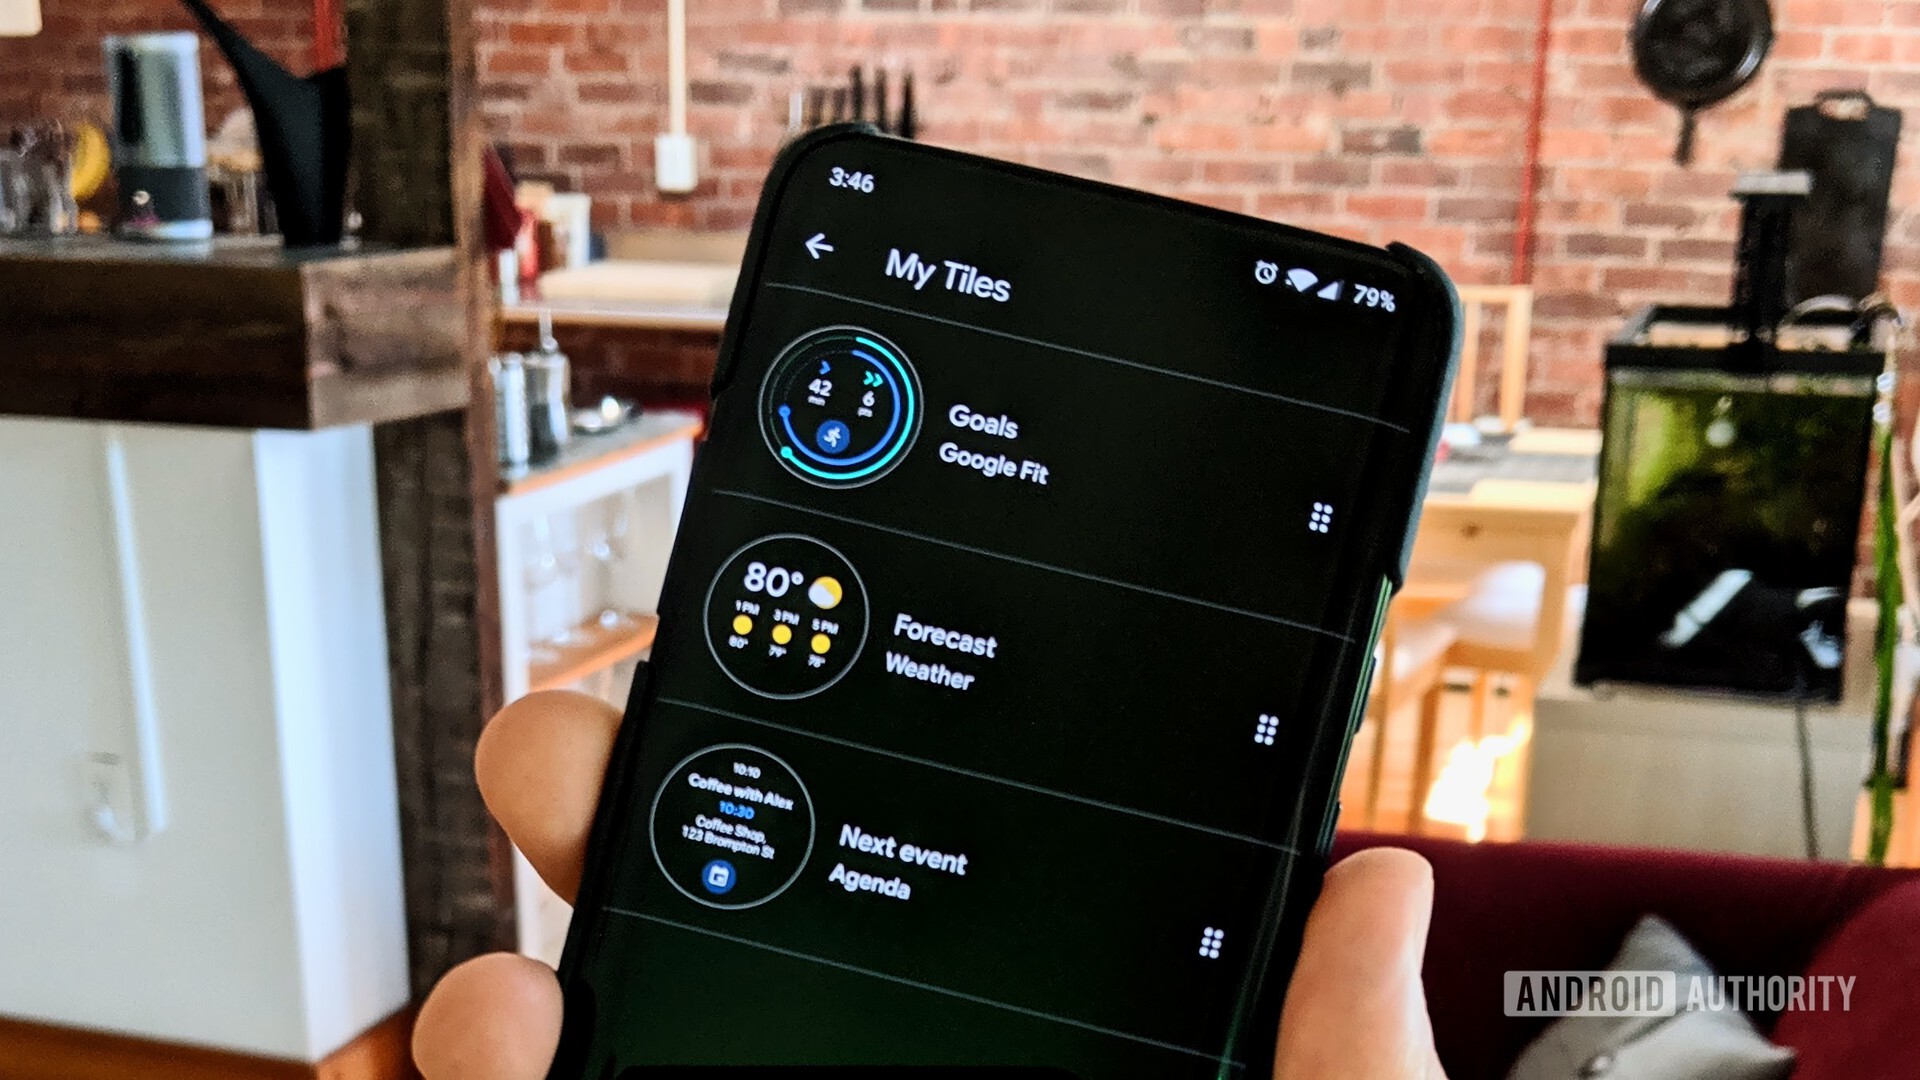 A photo of the new Tiles manager in the Wear OS smartphone app.